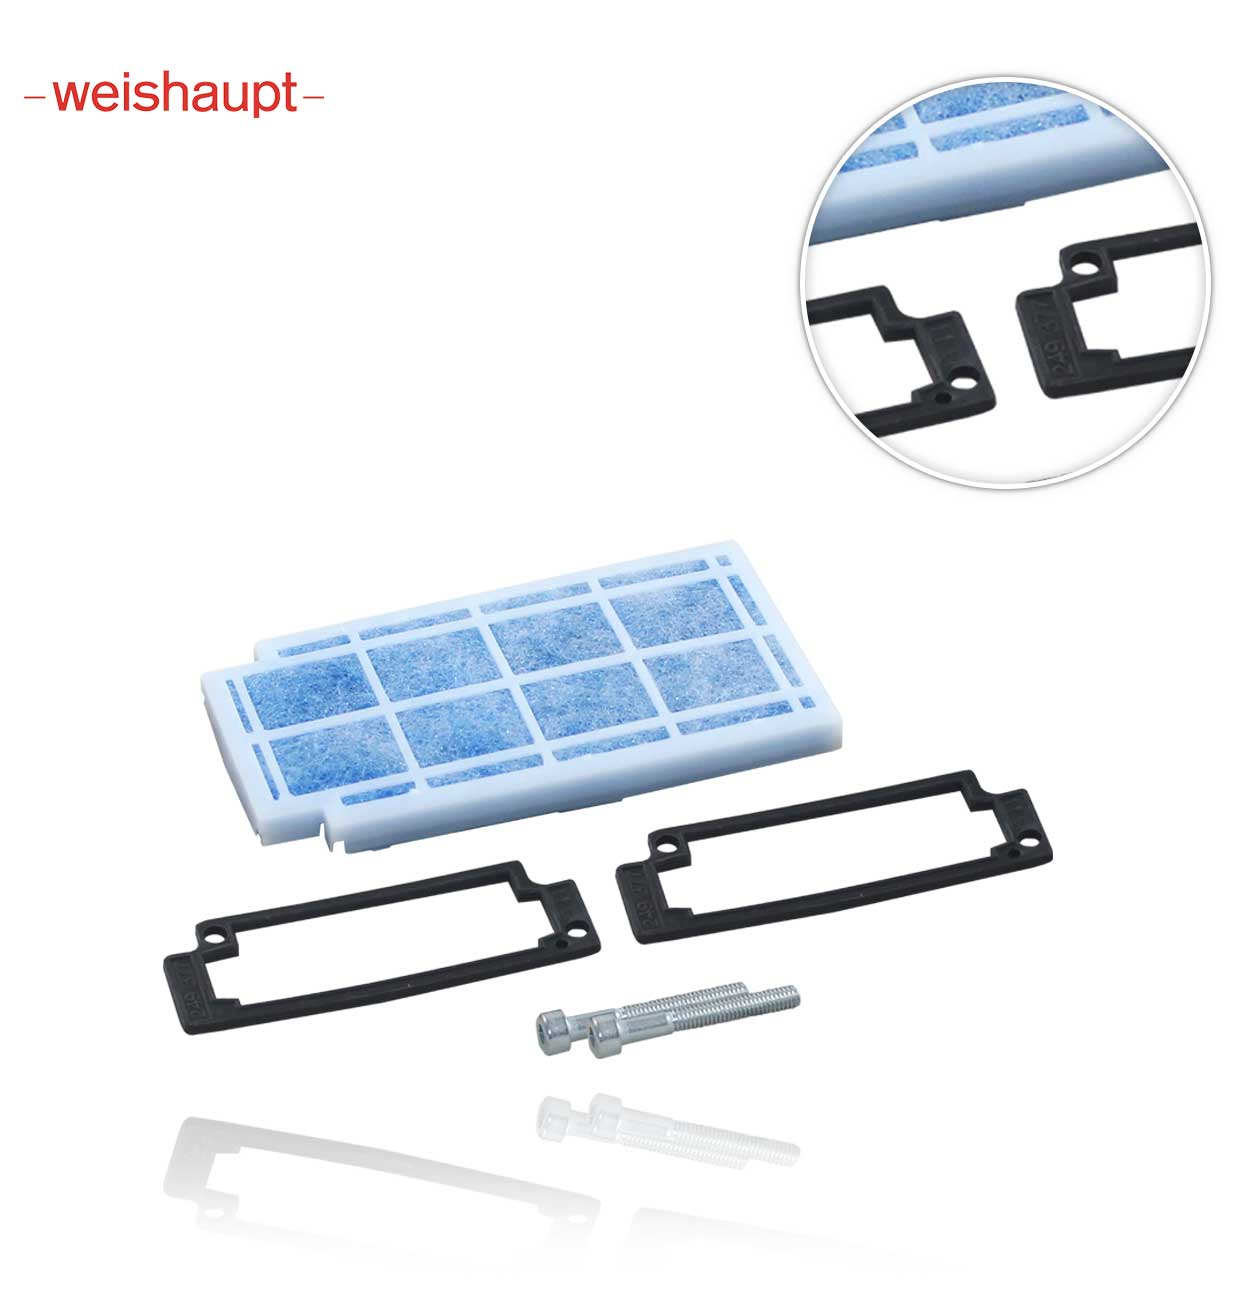 FILTER WITH GASKET FOR W-MF 507  WEISHAUPT 605253